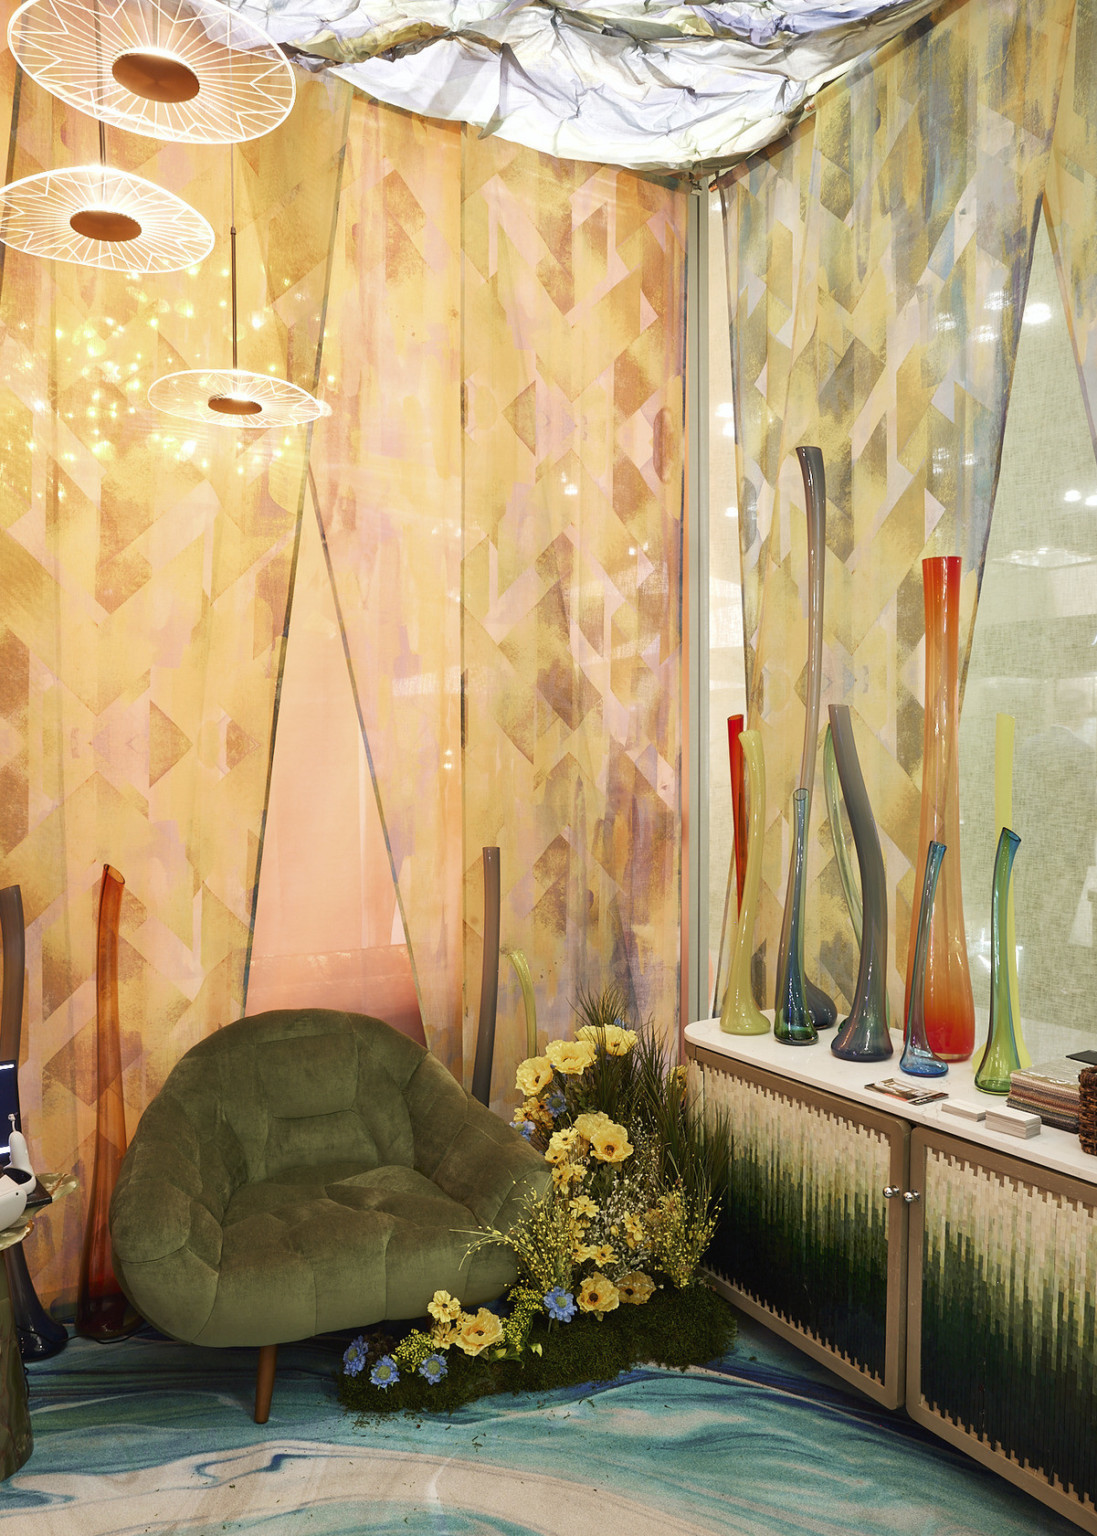 Corner with geometric patterned curtains on each wall. Warm tones left, cool right. Tall curved vases, green chair and flowers